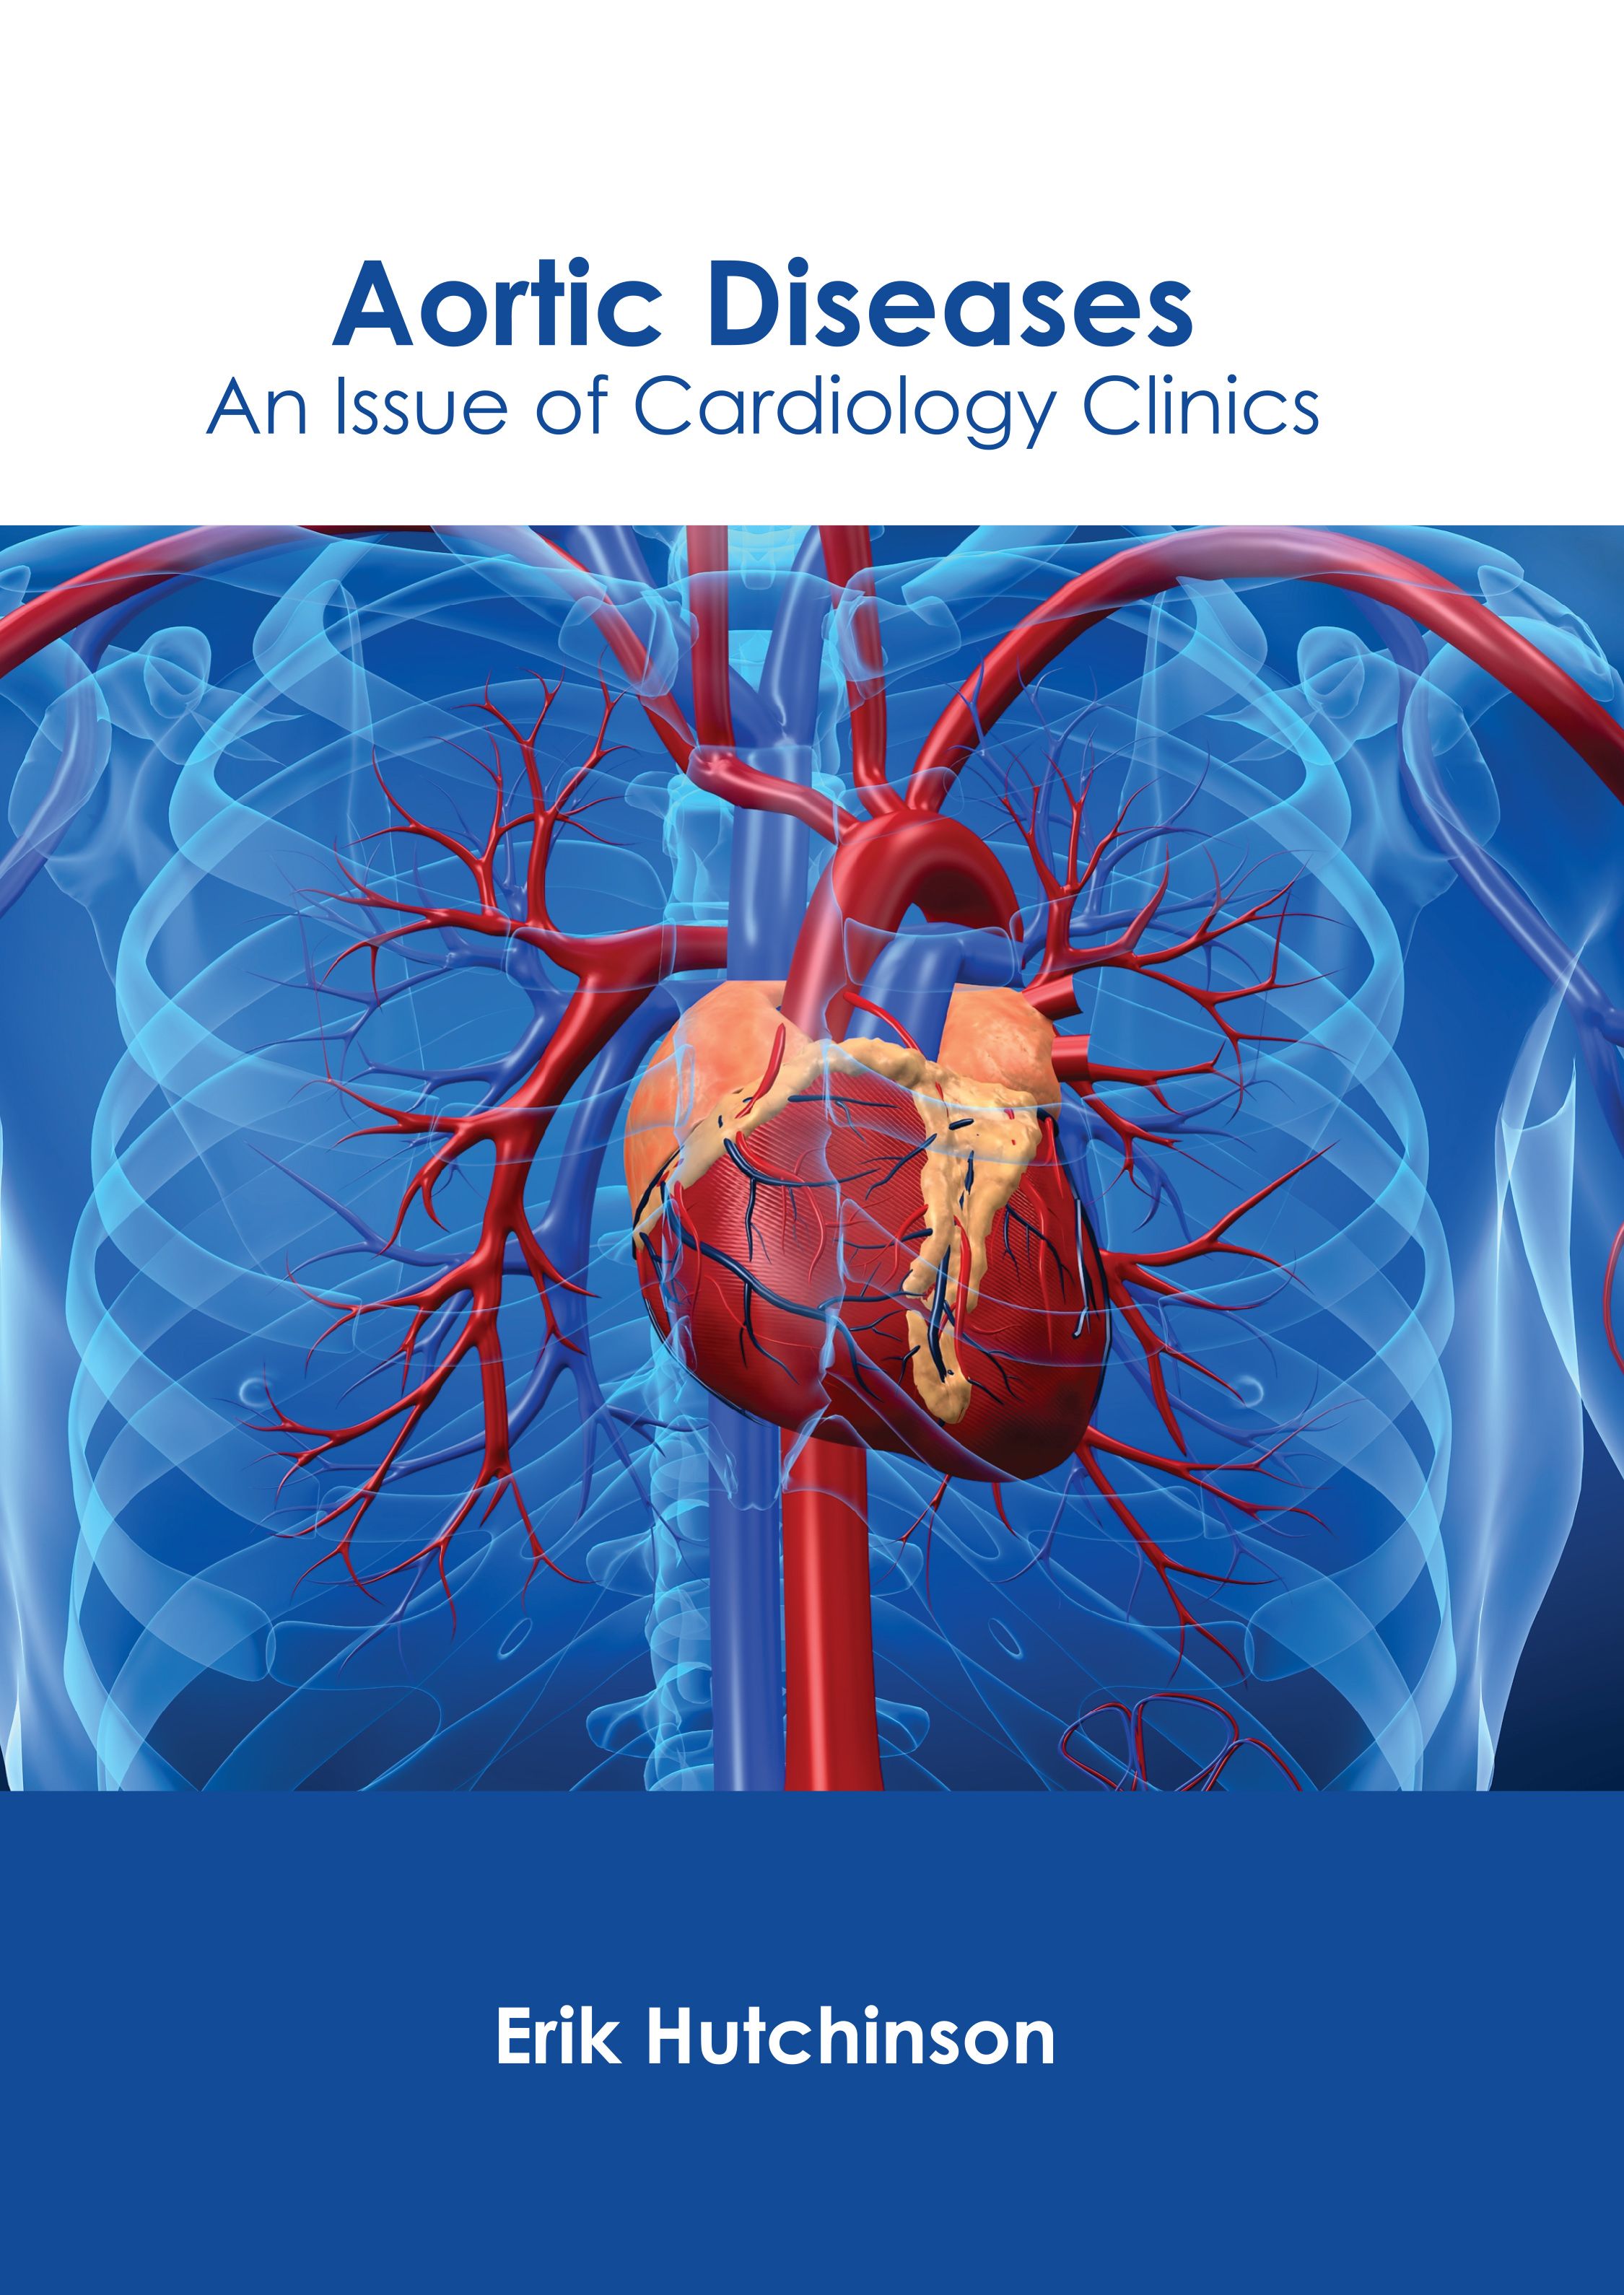 

medical-reference-books/cardiology/aortic-diseases-an-issue-of-cardiology-clinics-9781639278923